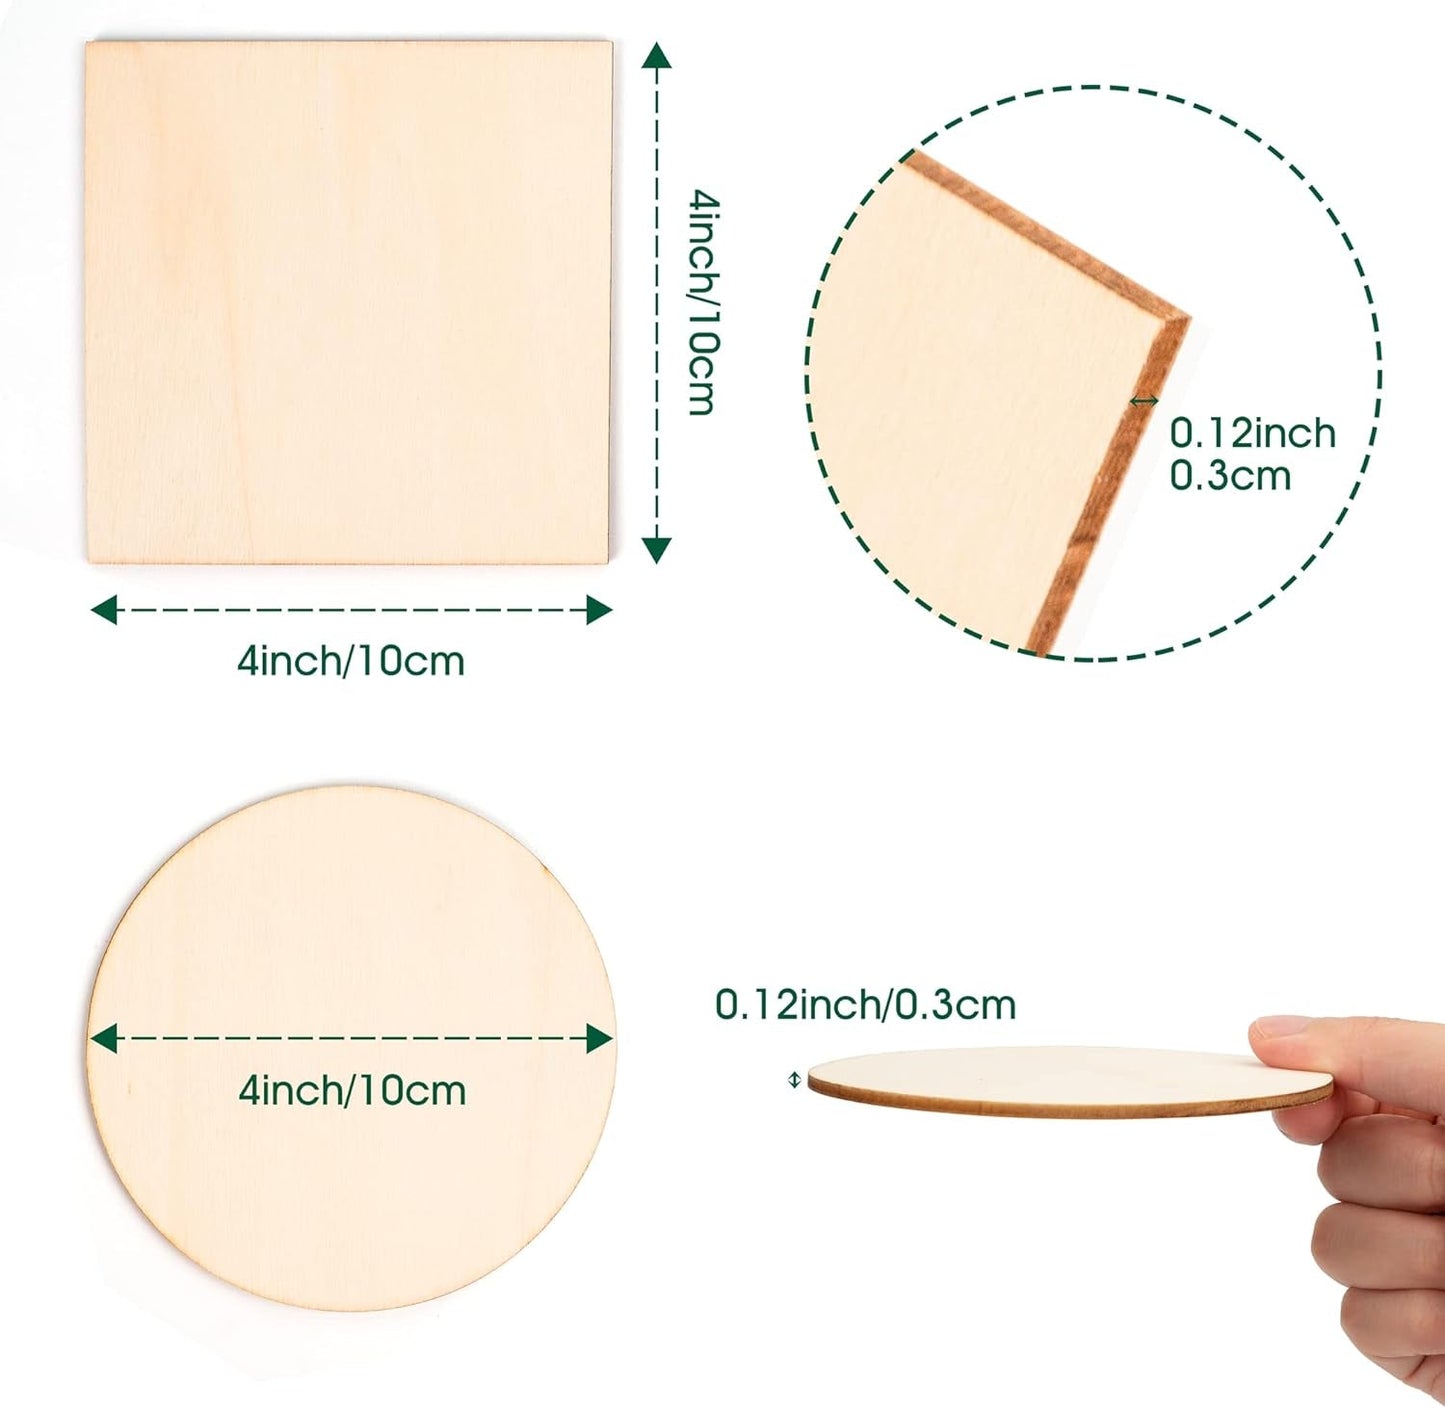 100 Pcs Wood Slices, 4X4 Inch Unfinished Wood Pieces for Cricut Xtool Glowforge, Blank Wooden Coasters for Crafts Home Wall Decoration Scrabble Tiles, 50 Pcs Wood Squares, 50 Pcs Wood Circles